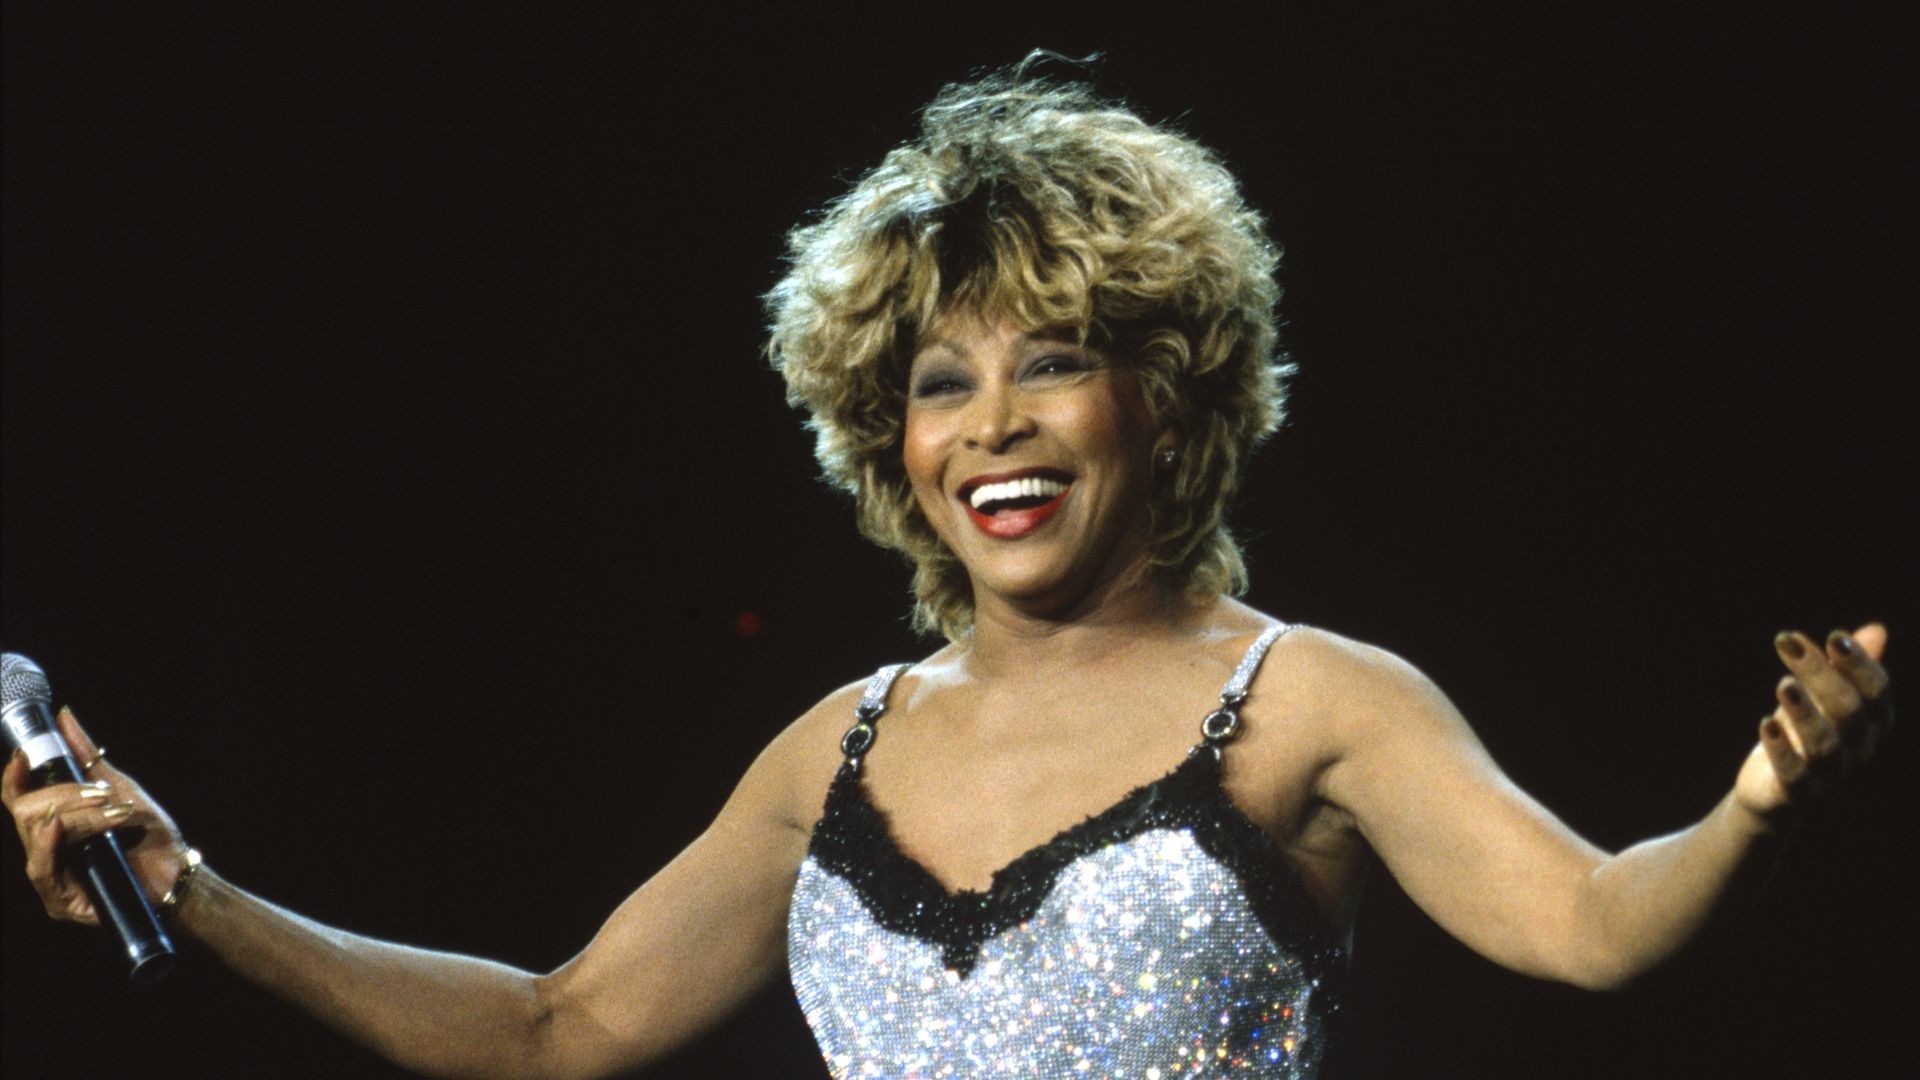 Tina Turner performs at Shoreline Amphitheatre on May 23, 1997 in Mountain View California